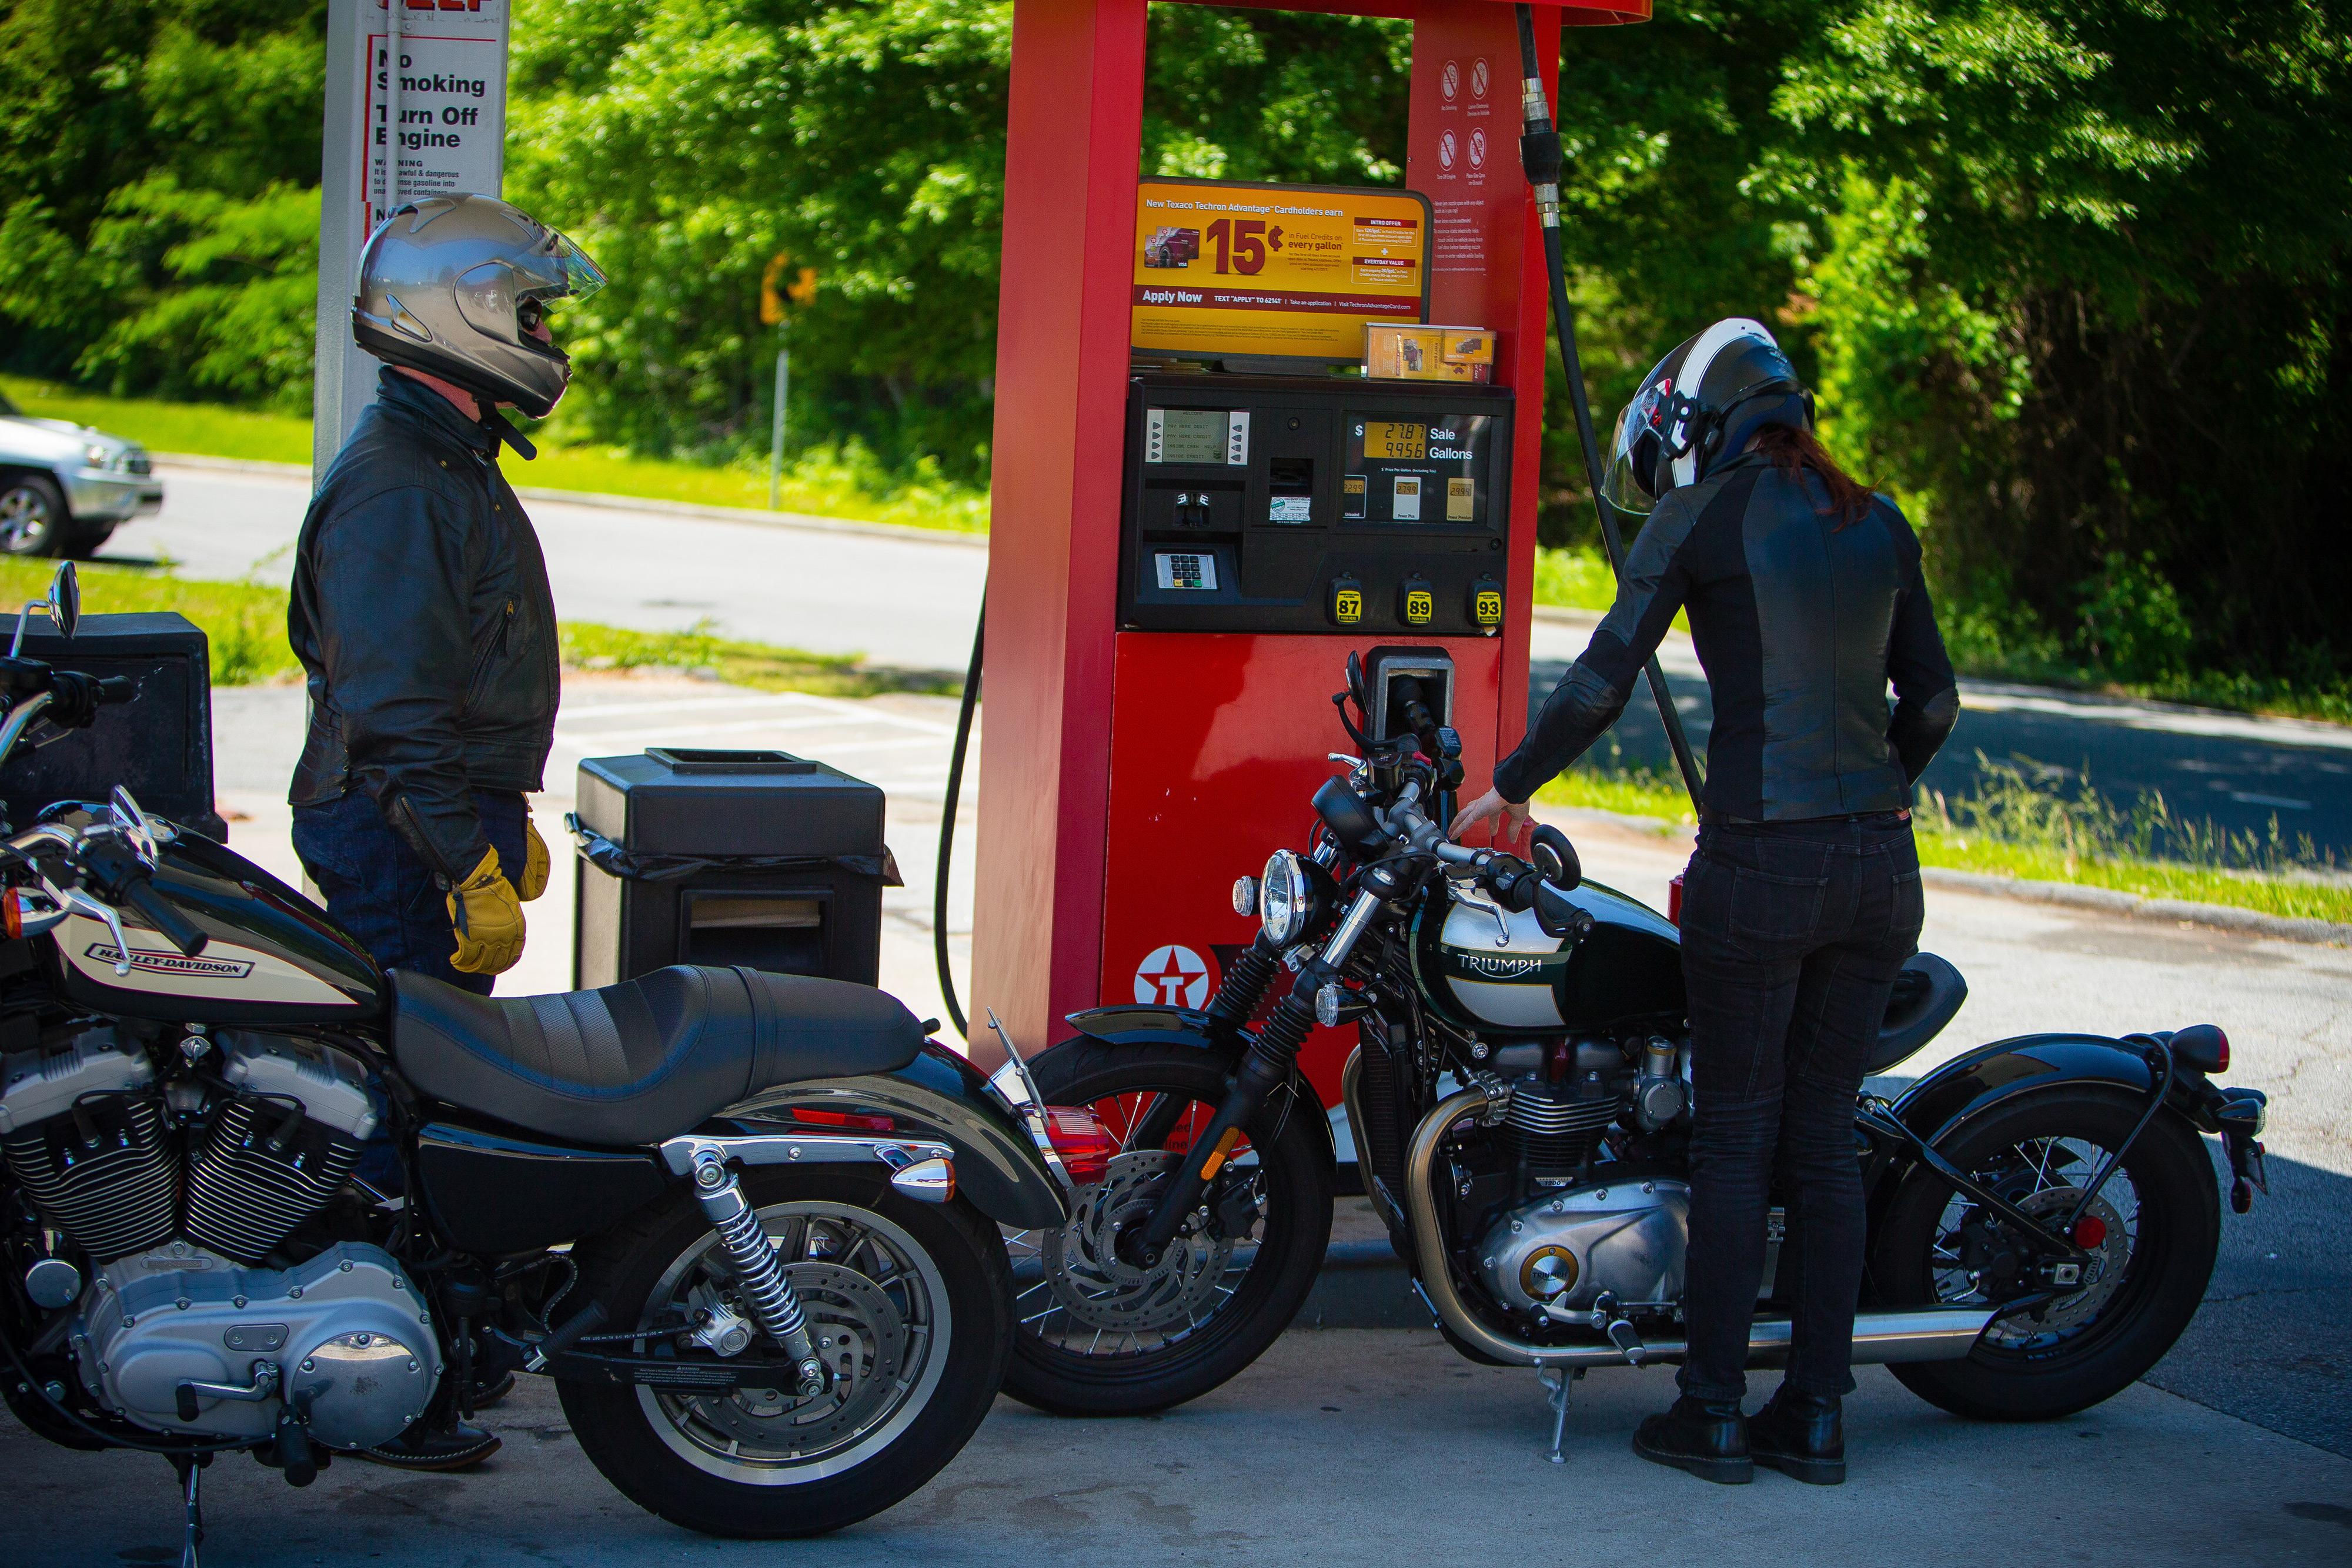 motorcycle at gas station